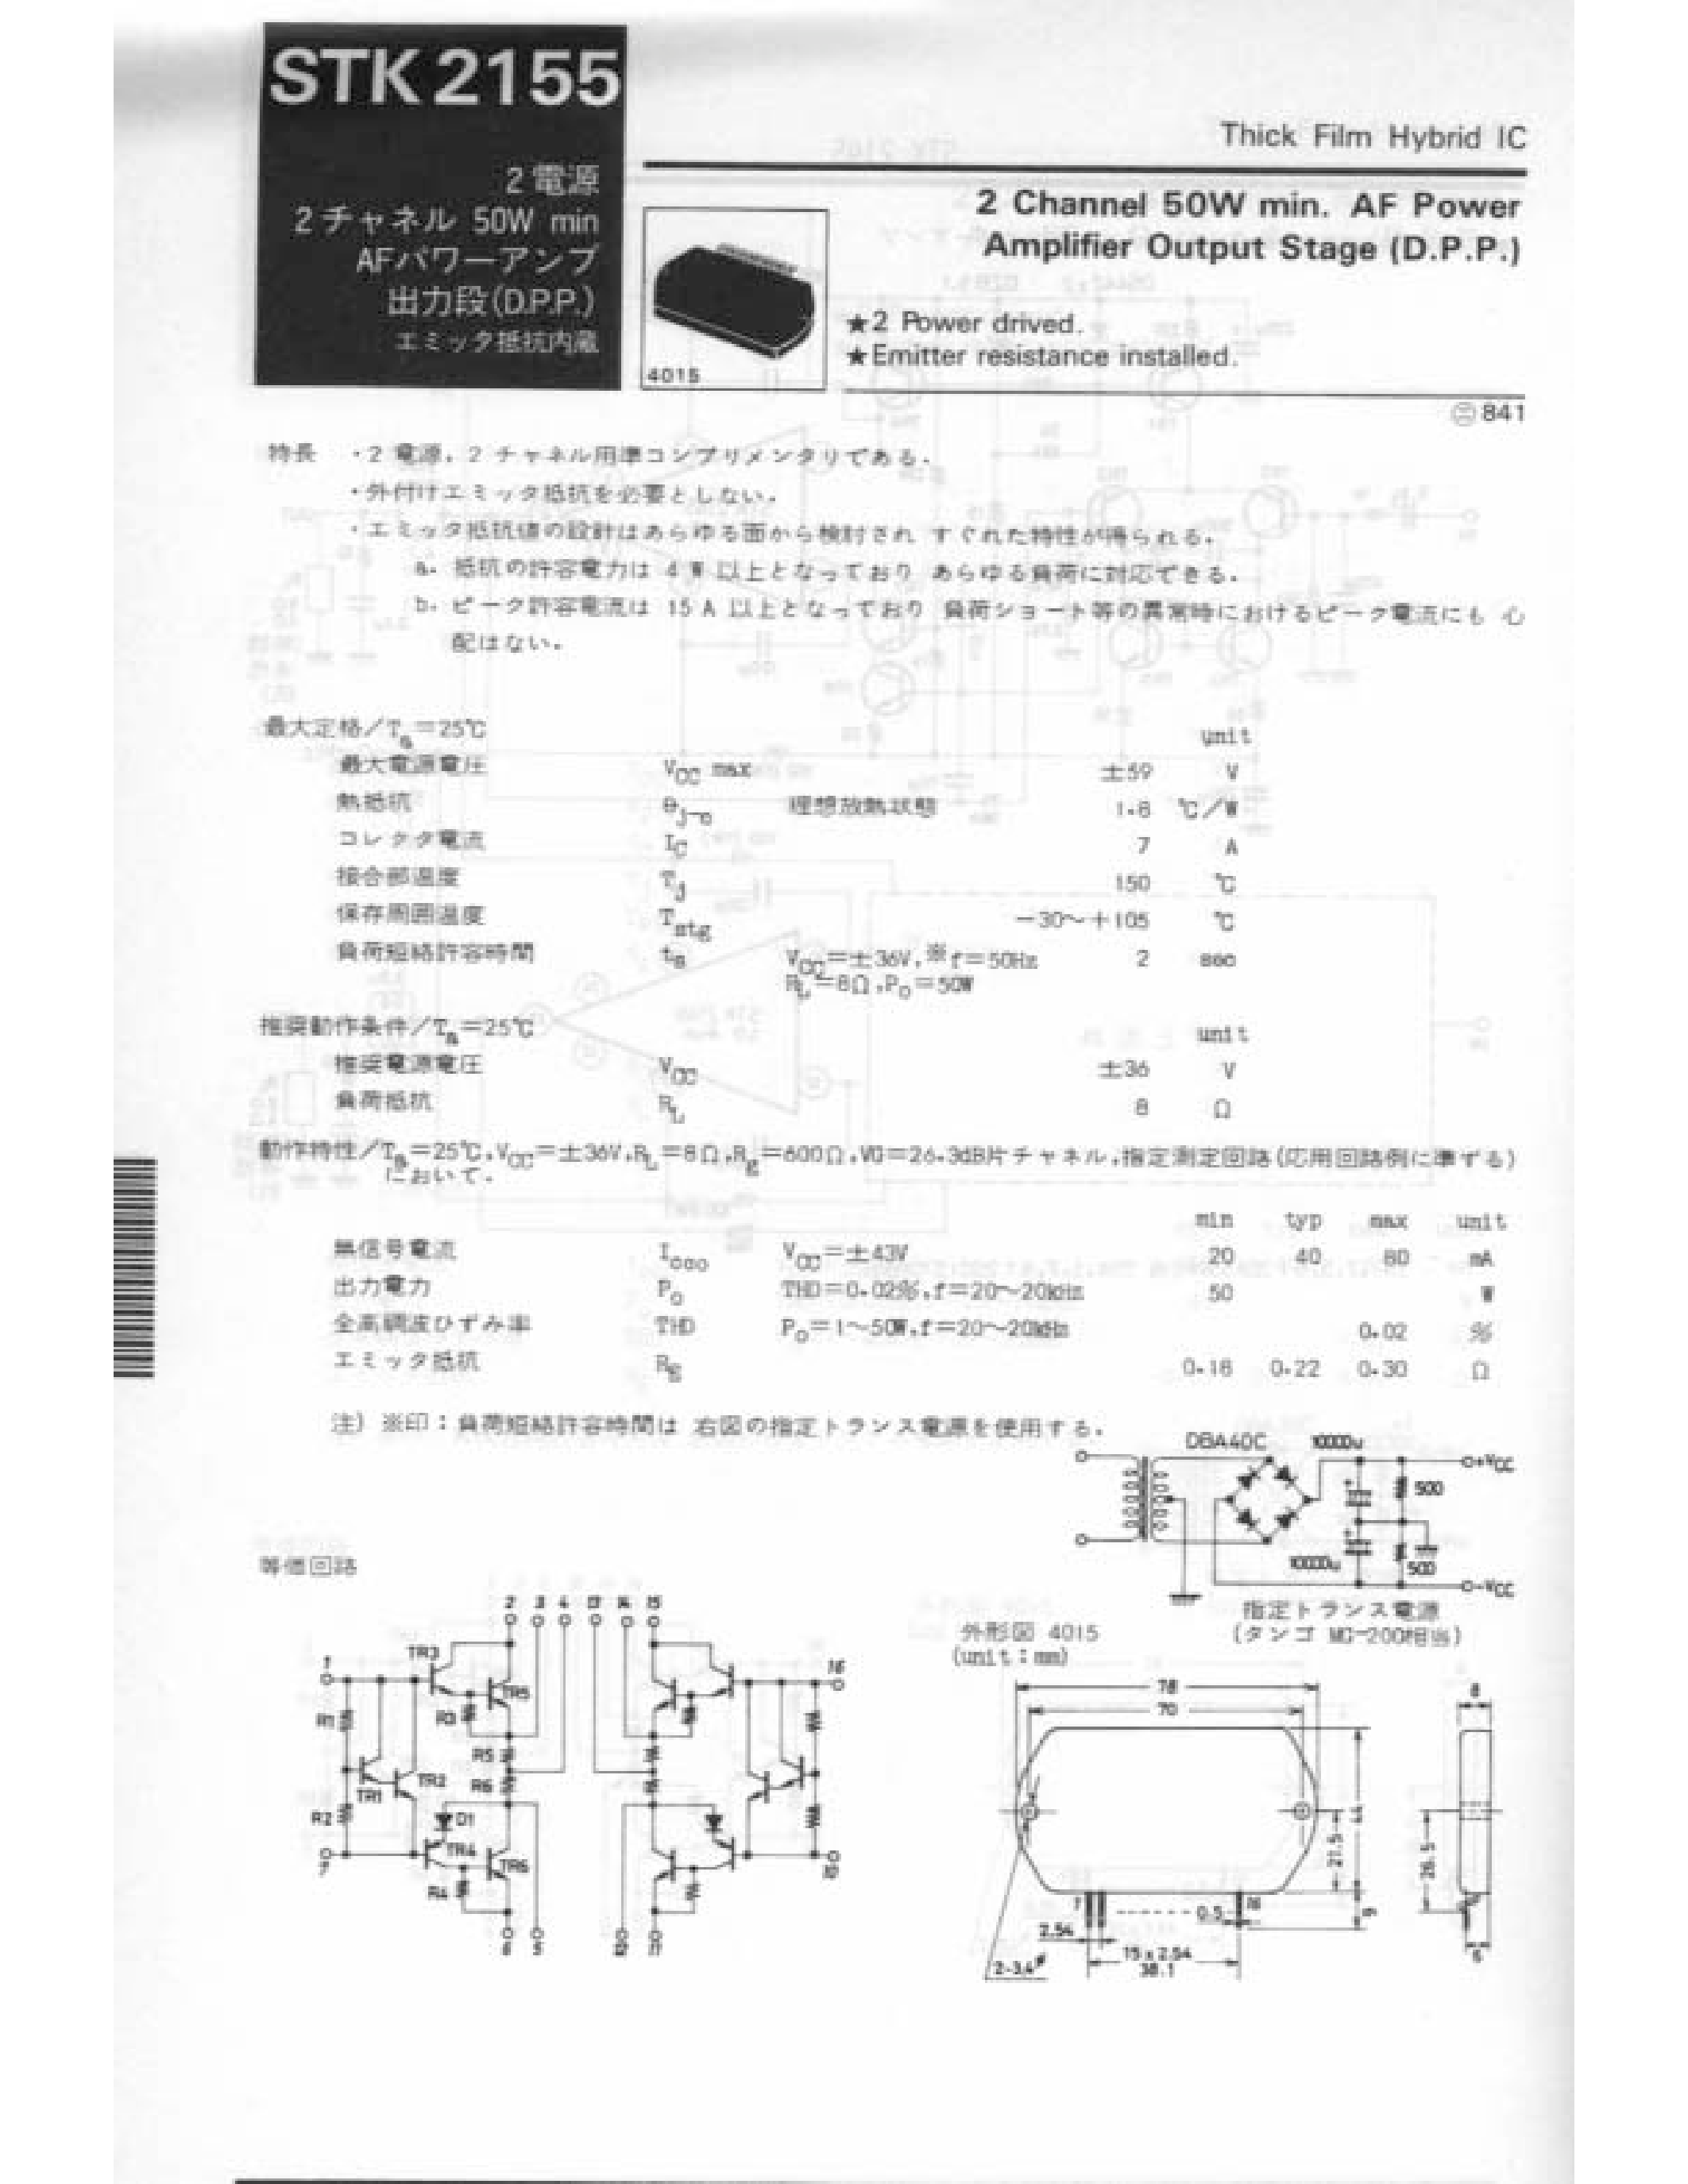 Datasheet STK2155 - 2 CHANNEL 50W MIN AF POWER AMPLIFIER OUTPUT STAGE page 1